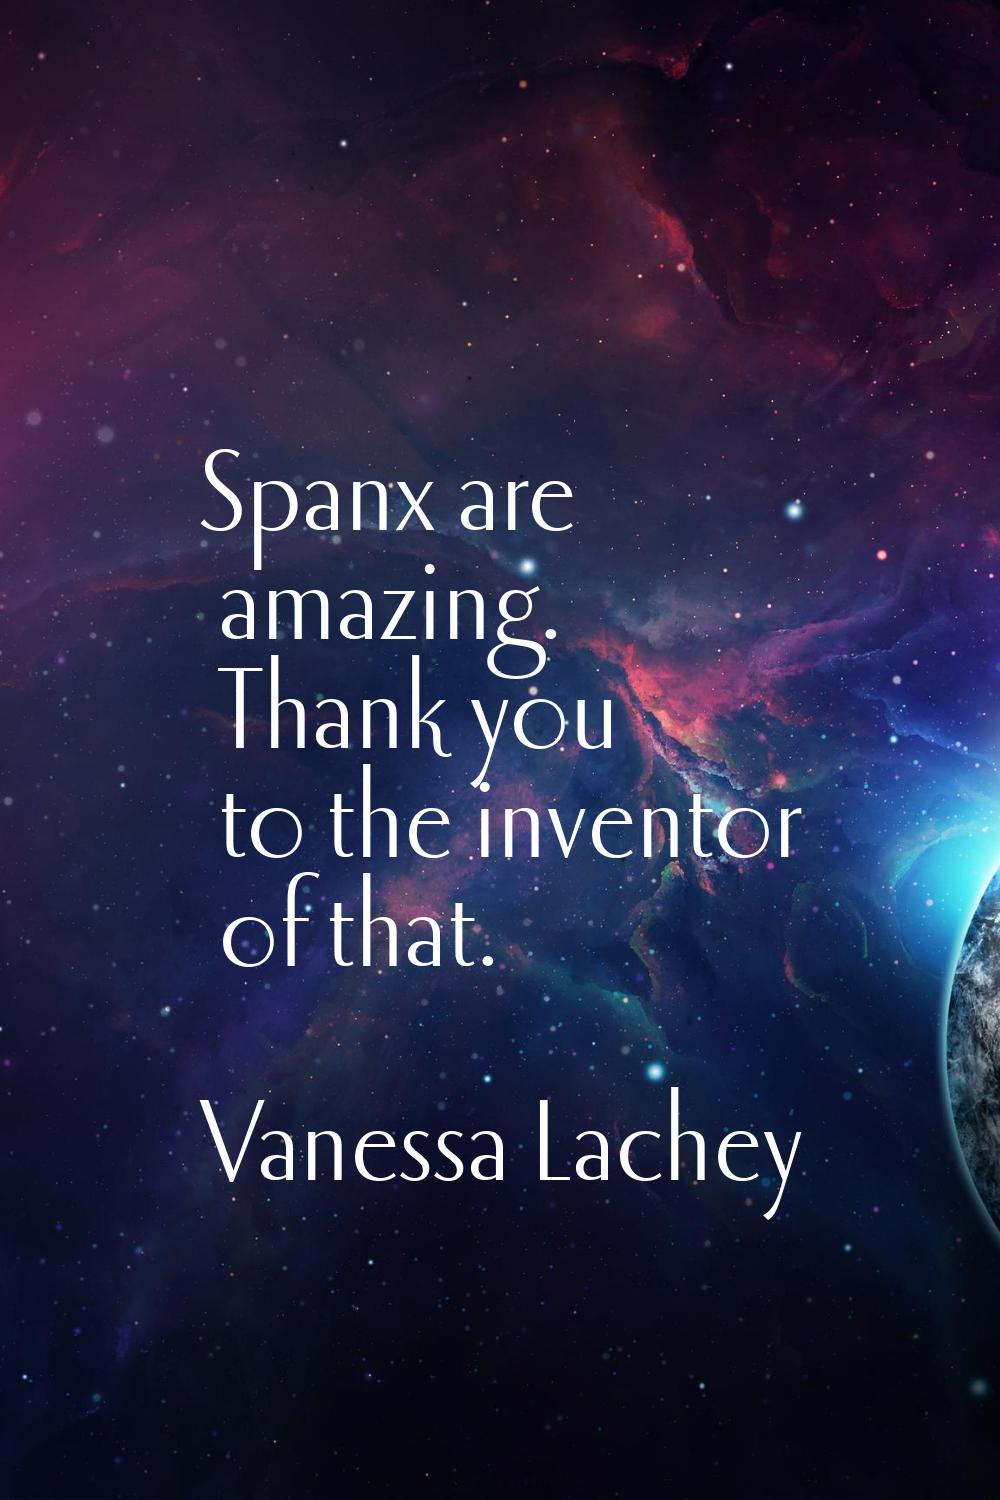 Spanx are amazing. Thank you to the inventor of that.